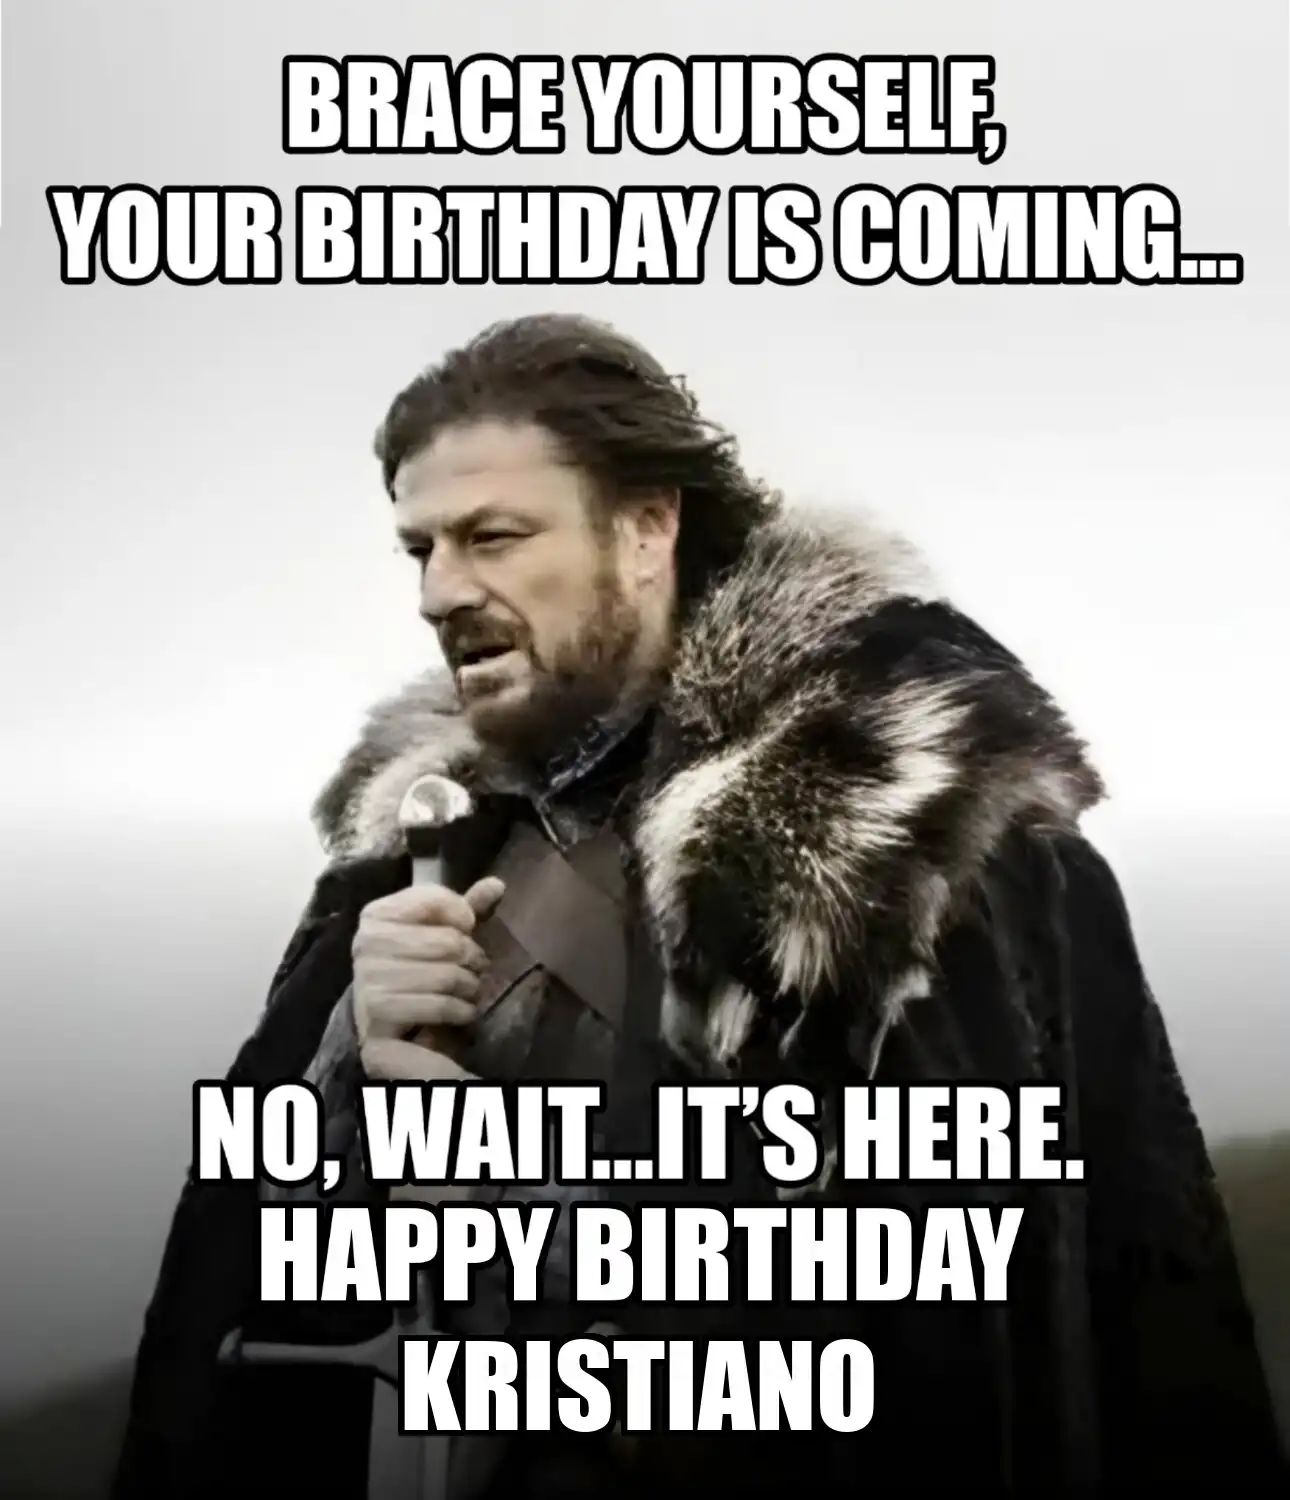 Happy Birthday Kristiano Brace Yourself Your Birthday Is Coming Meme